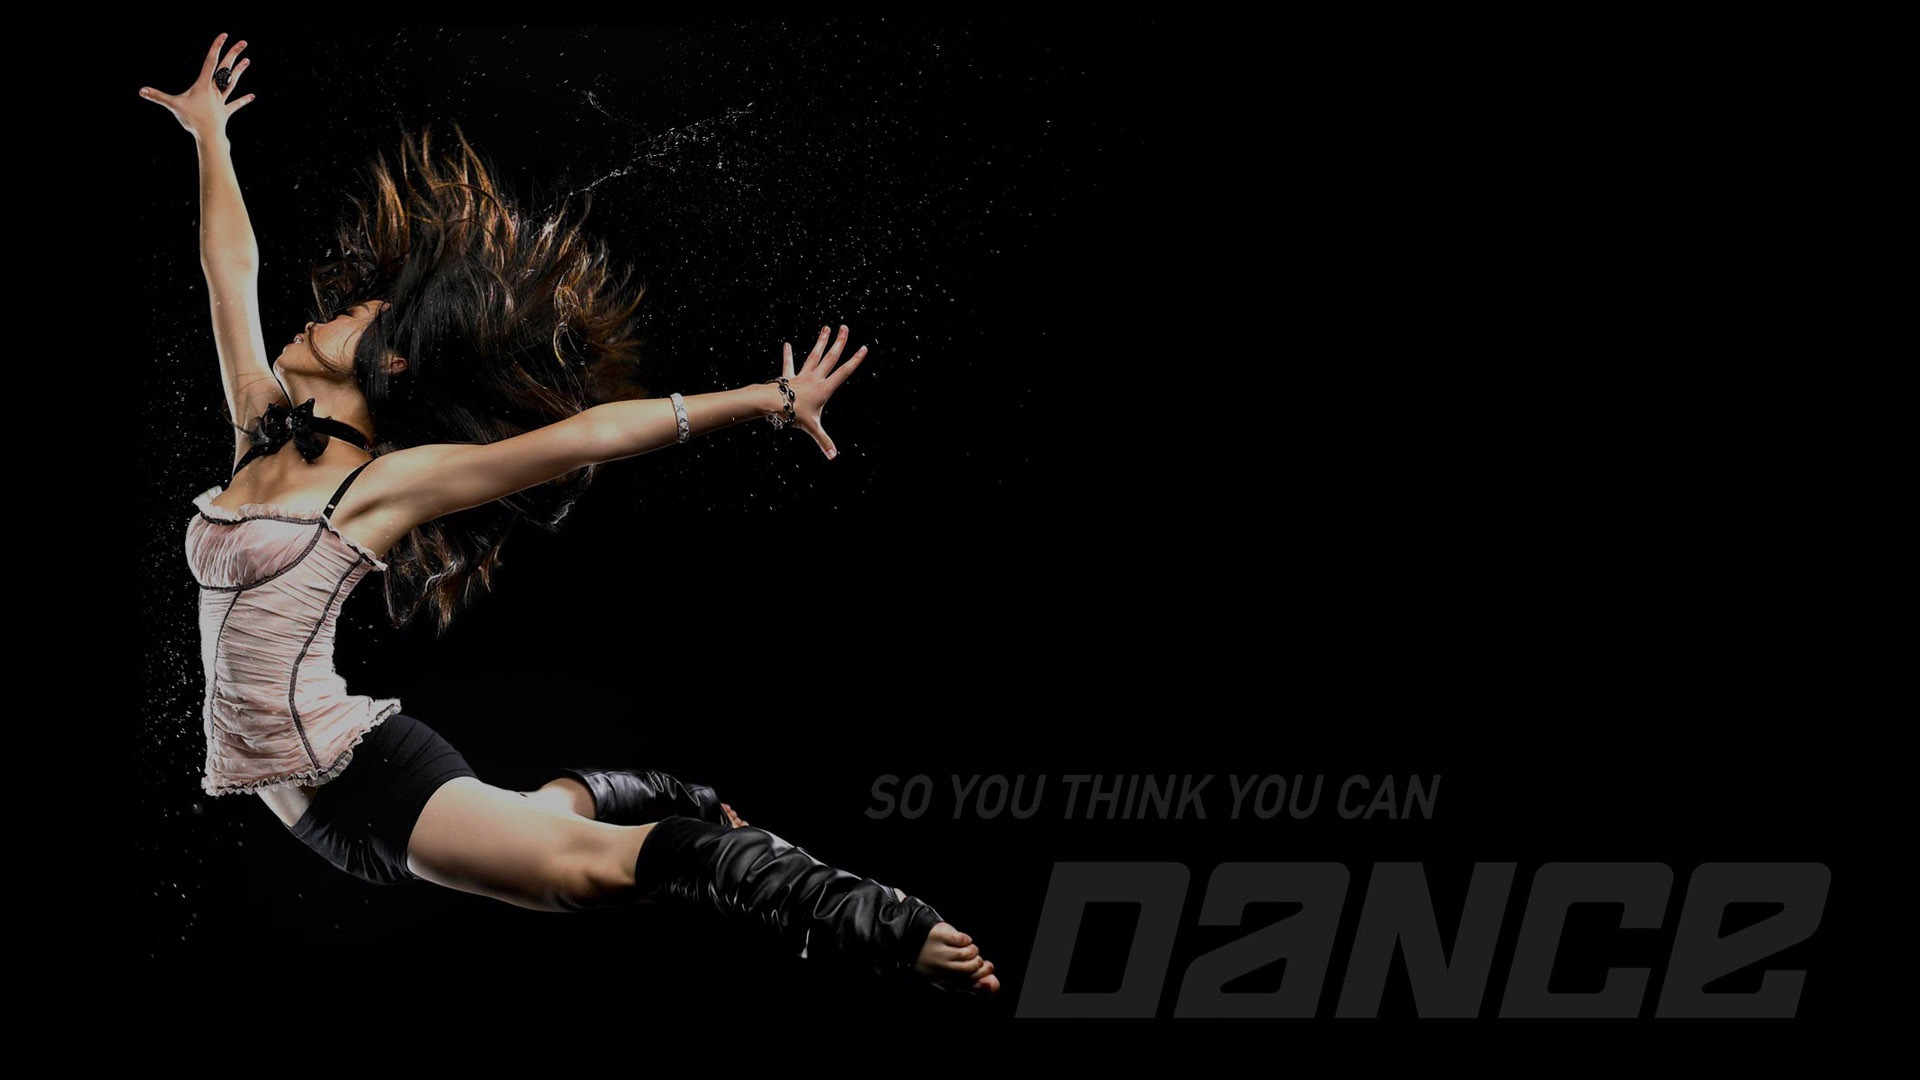 So You Think You Can Dance 舞林爭霸壁紙(一) #1 - 1920x1080